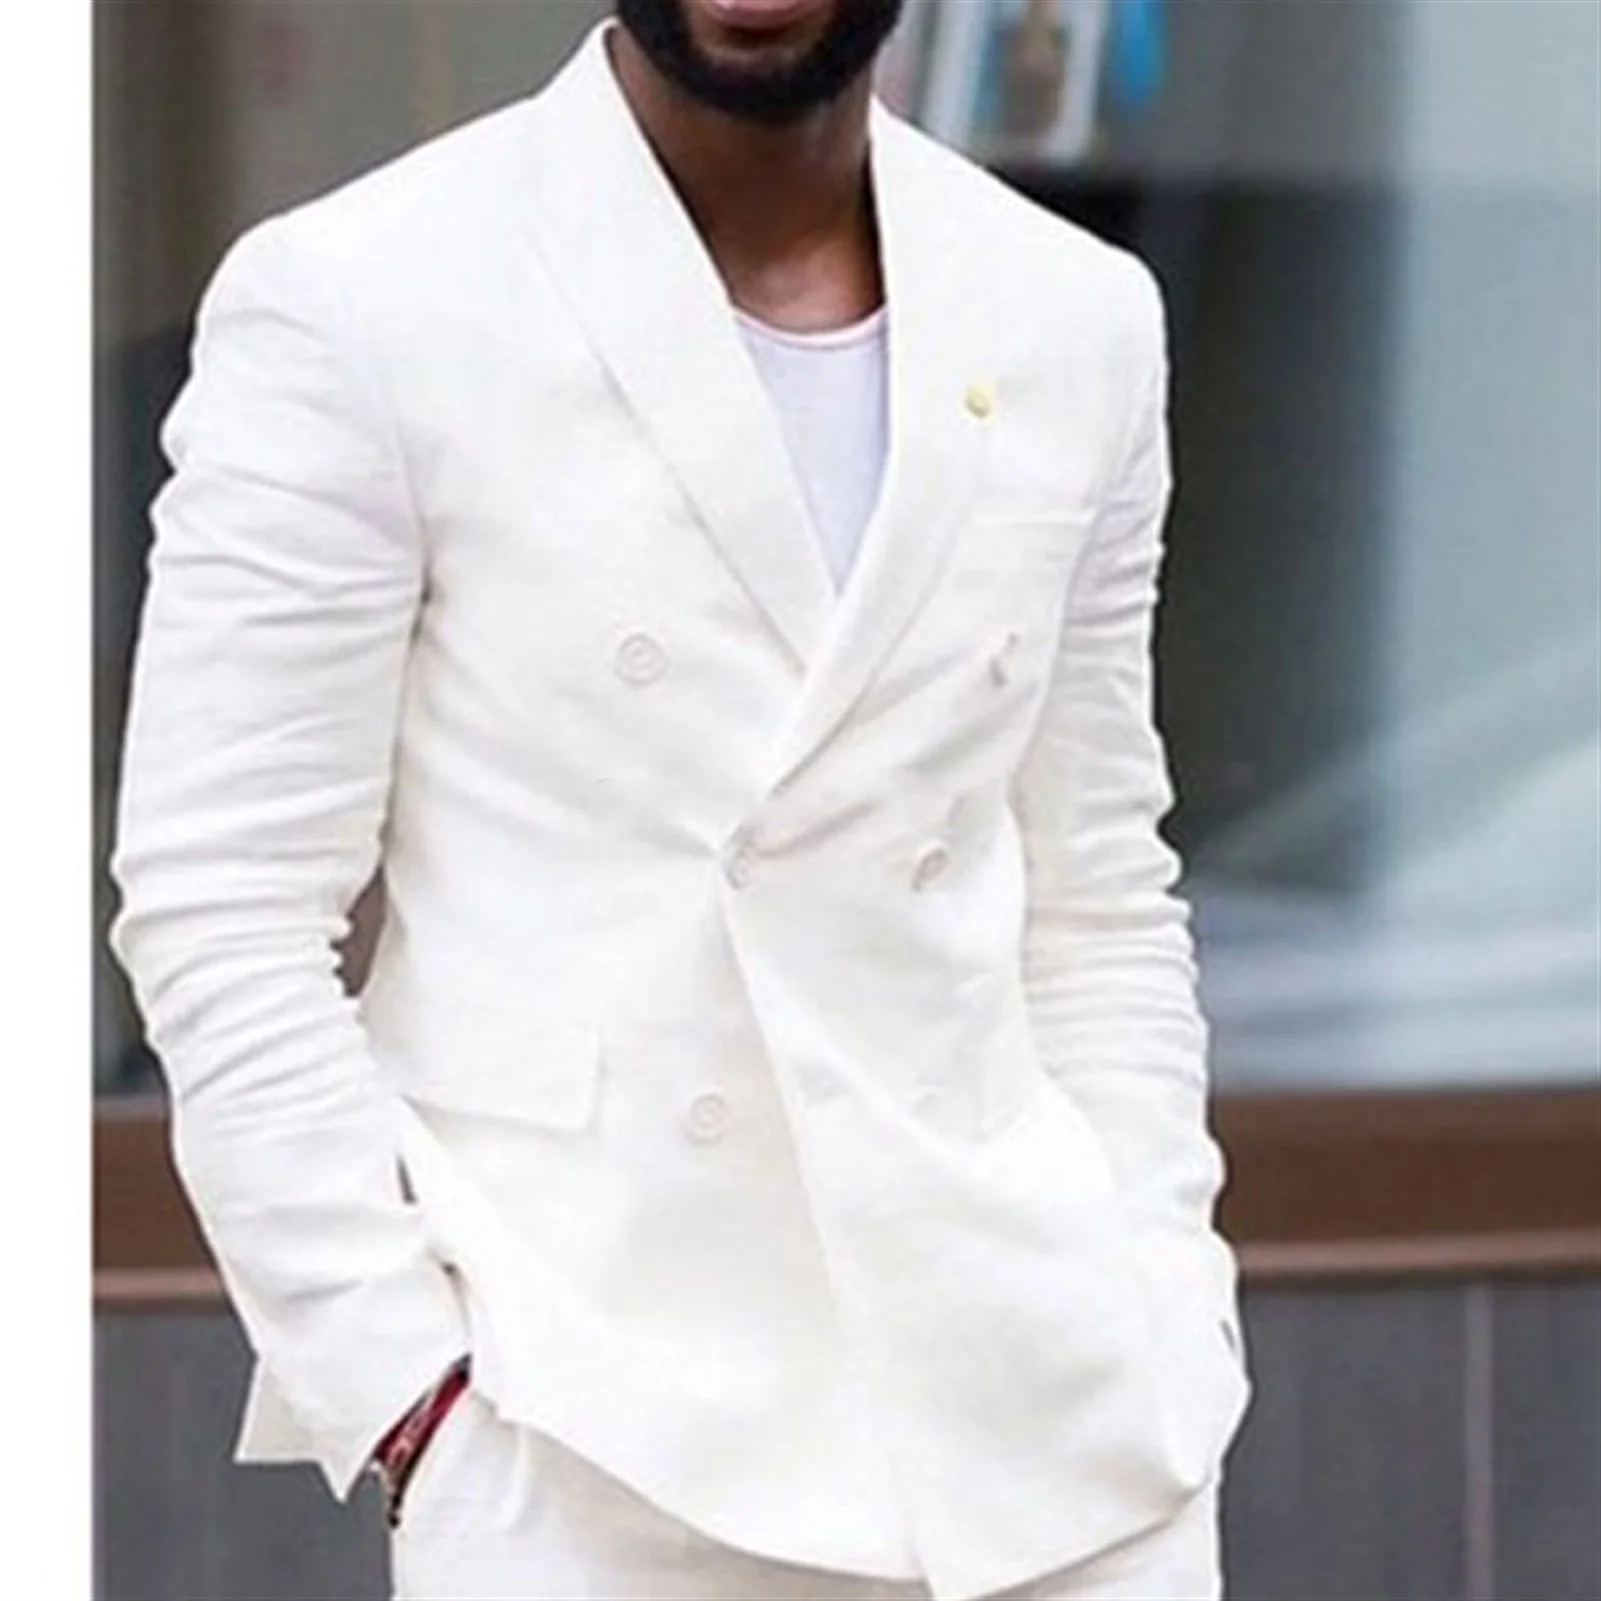 2022 Newest White Linen Summer Men's Suit Double Breasted Two Piece Slim Shorts Jacket Casual Fashion Wedding Groom Tuxedo